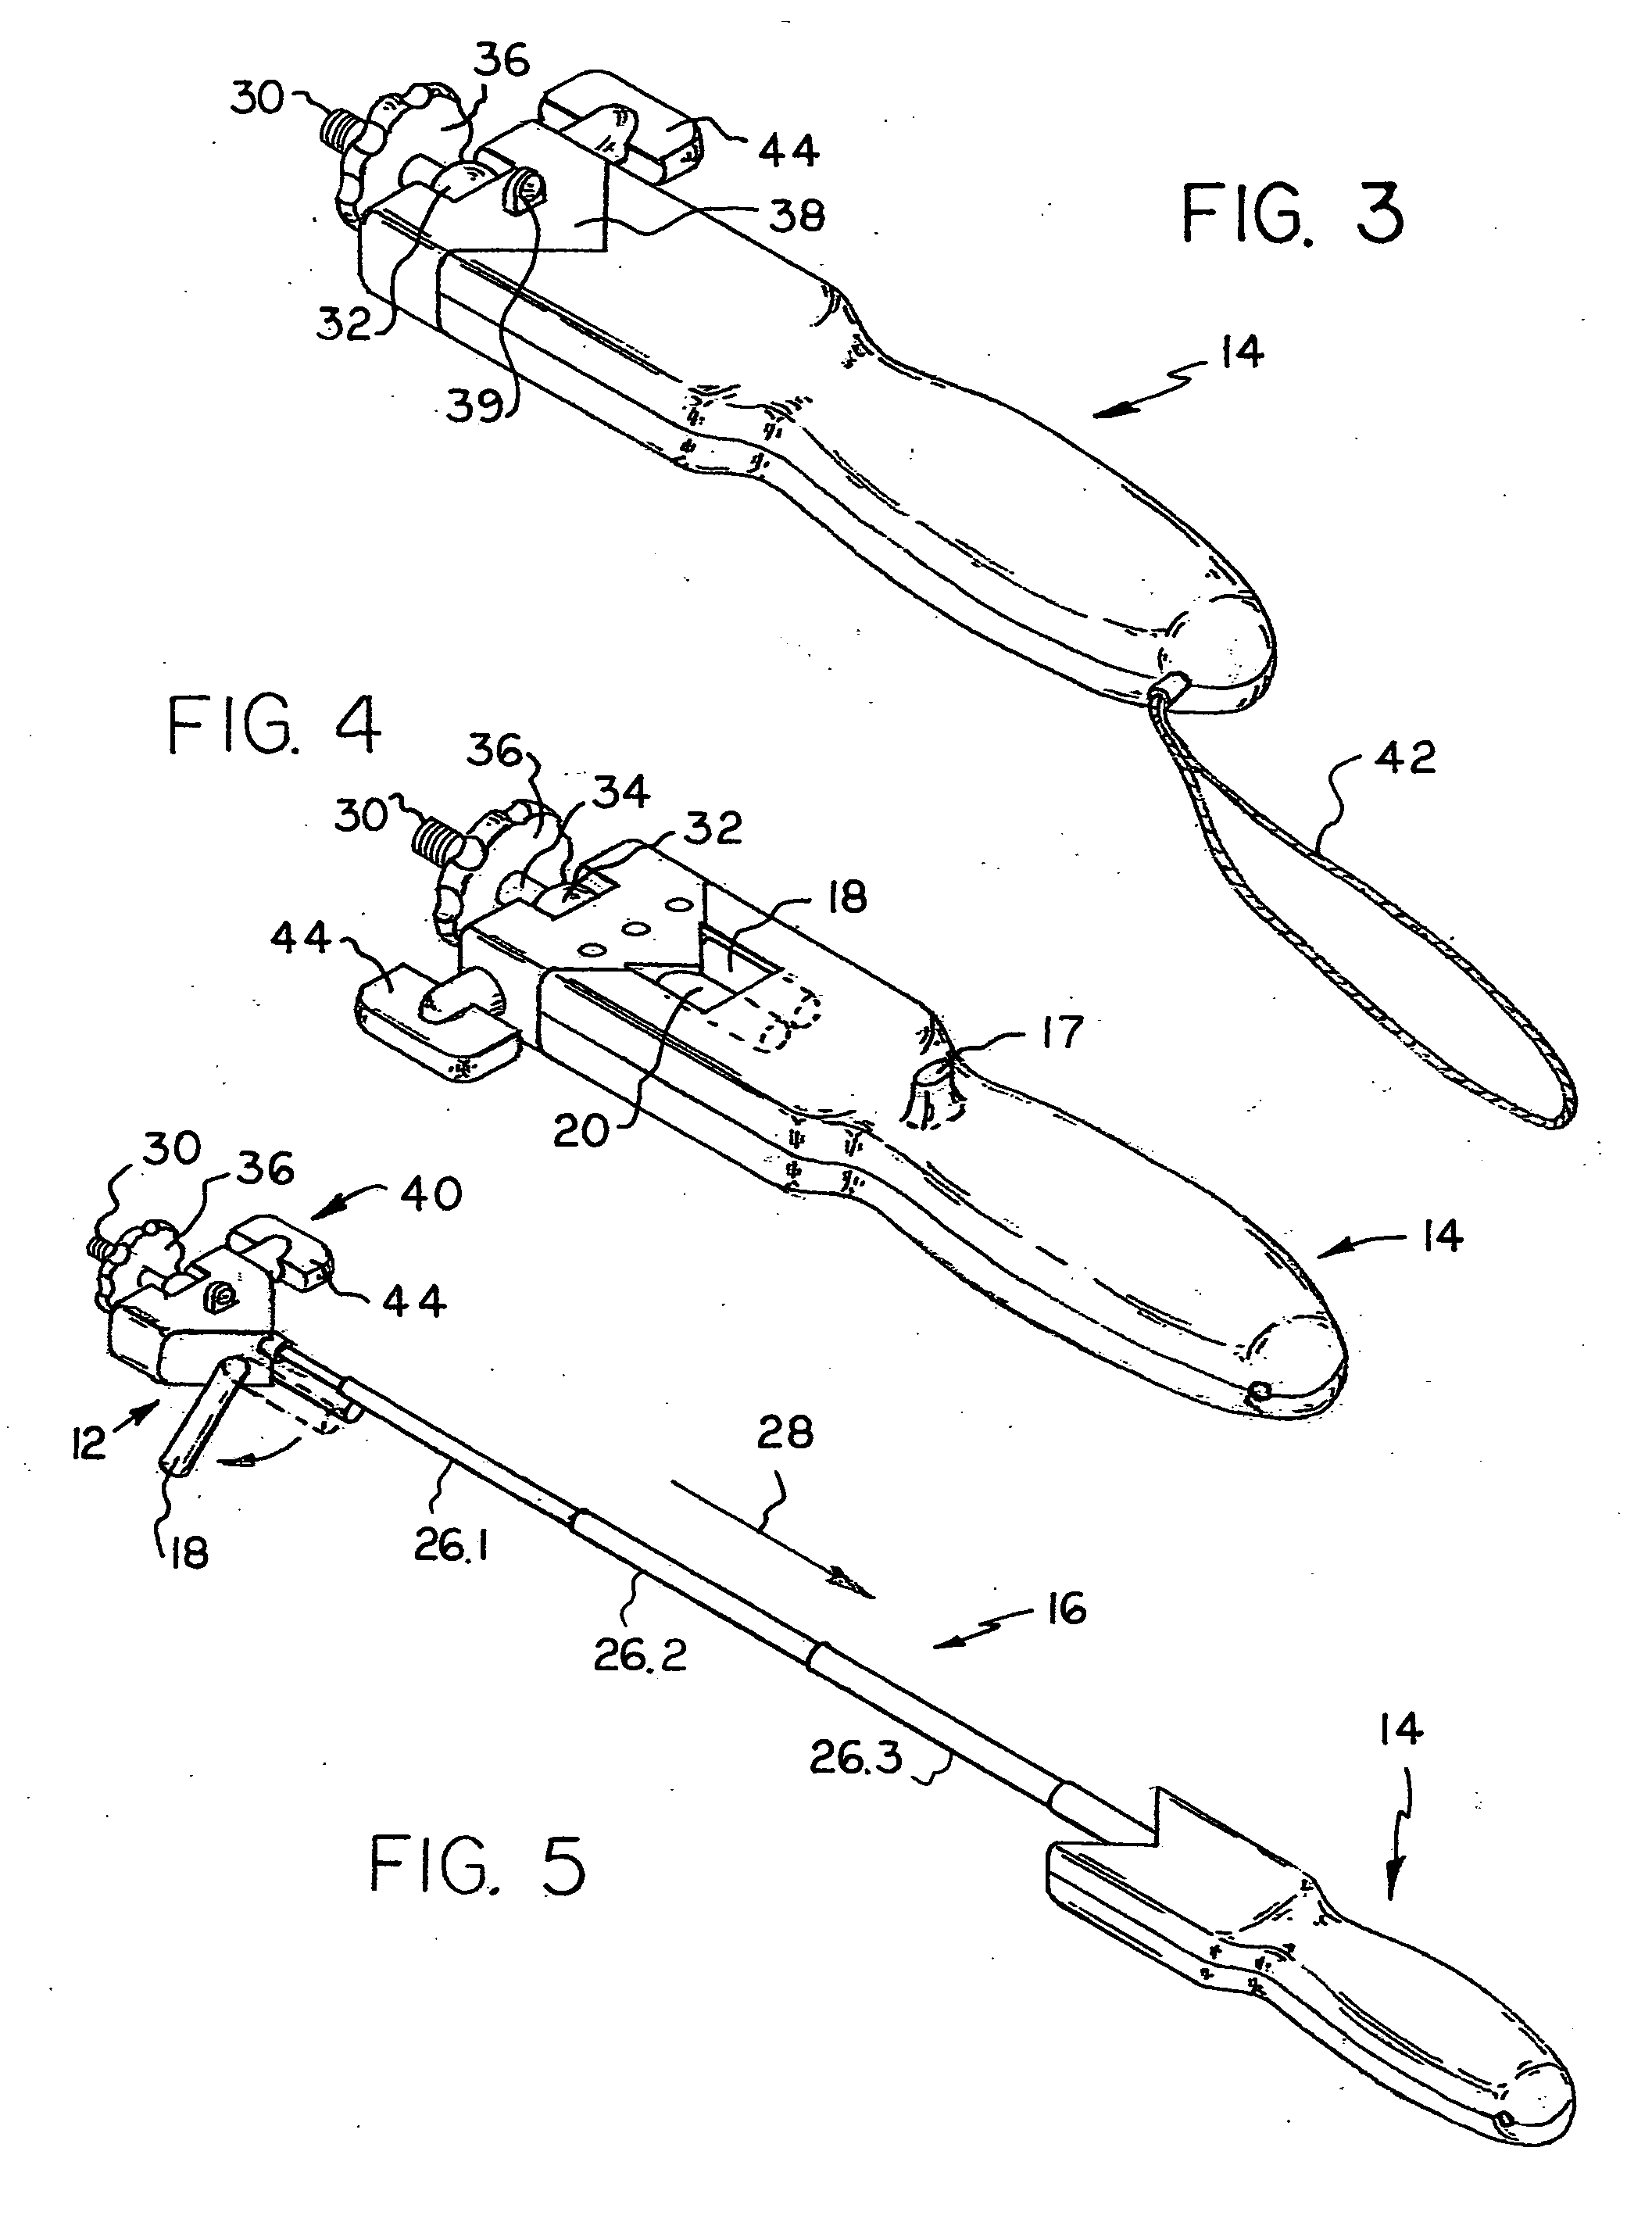 Apparatus for supporting a camera